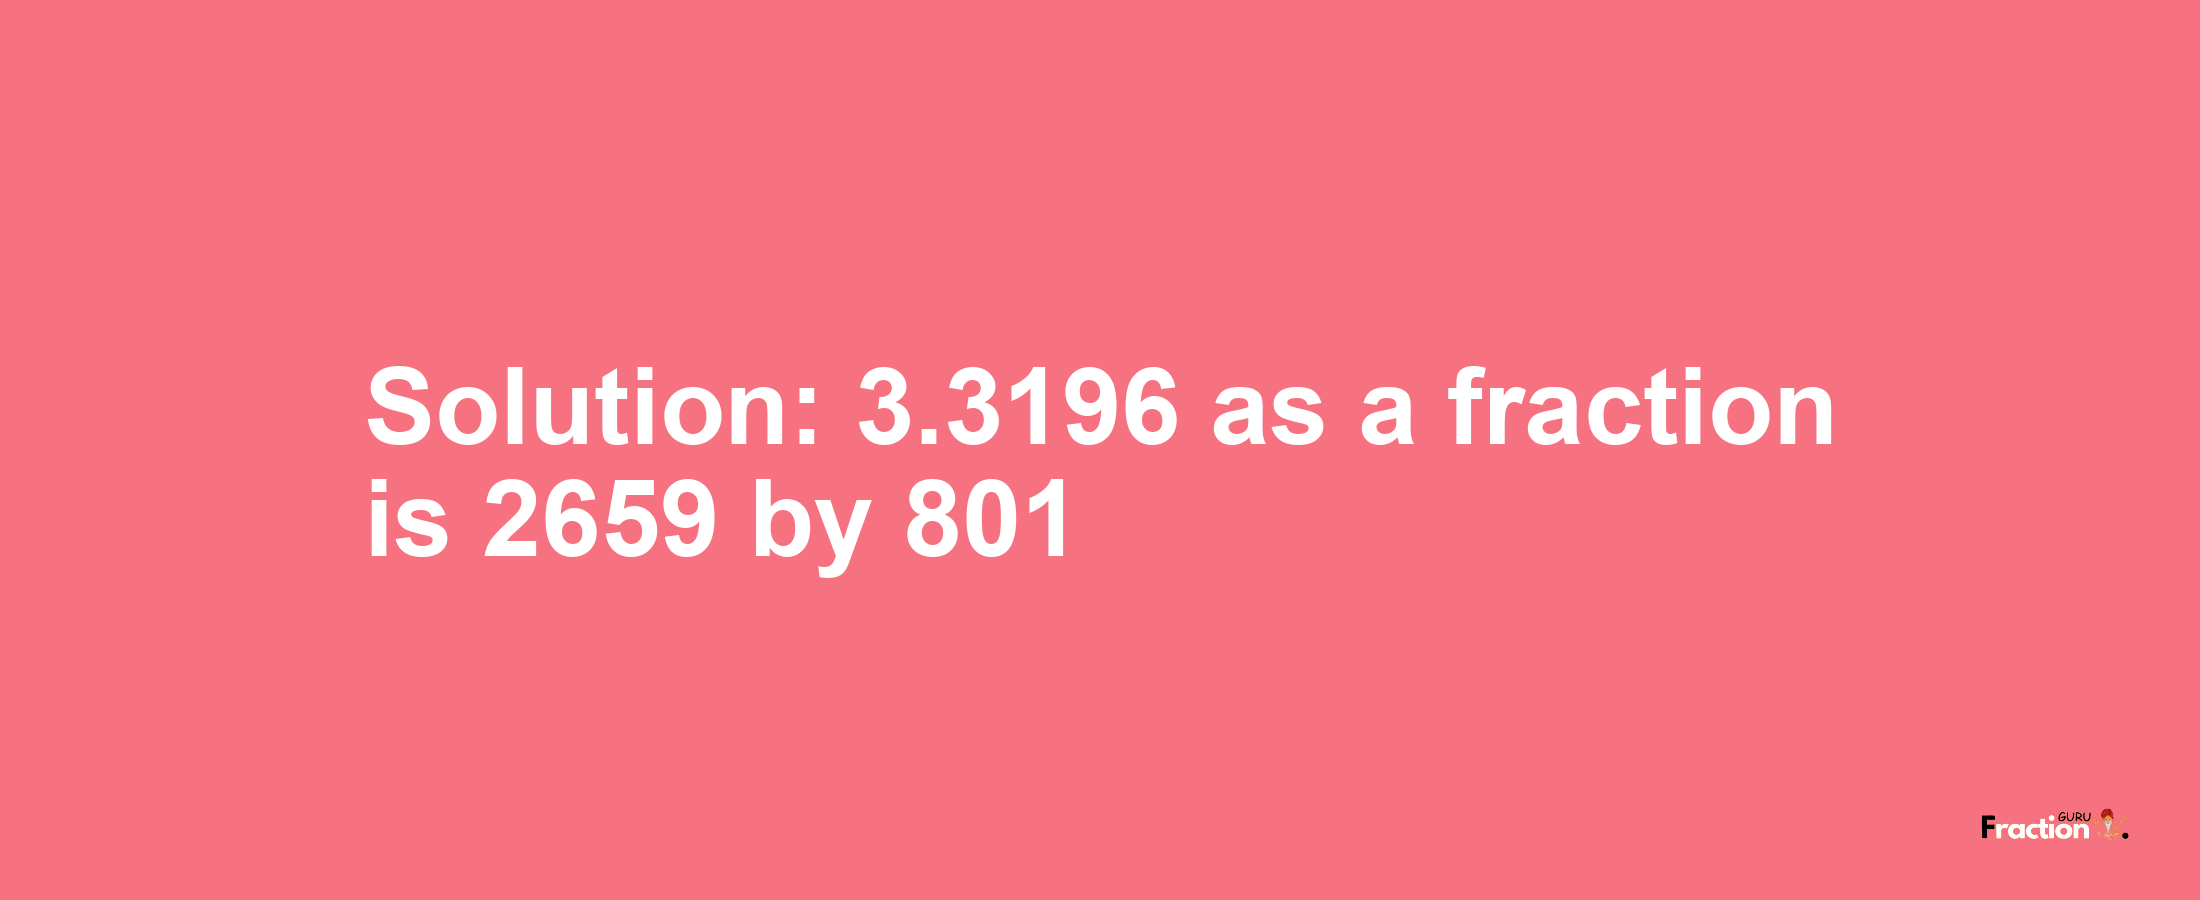 Solution:3.3196 as a fraction is 2659/801